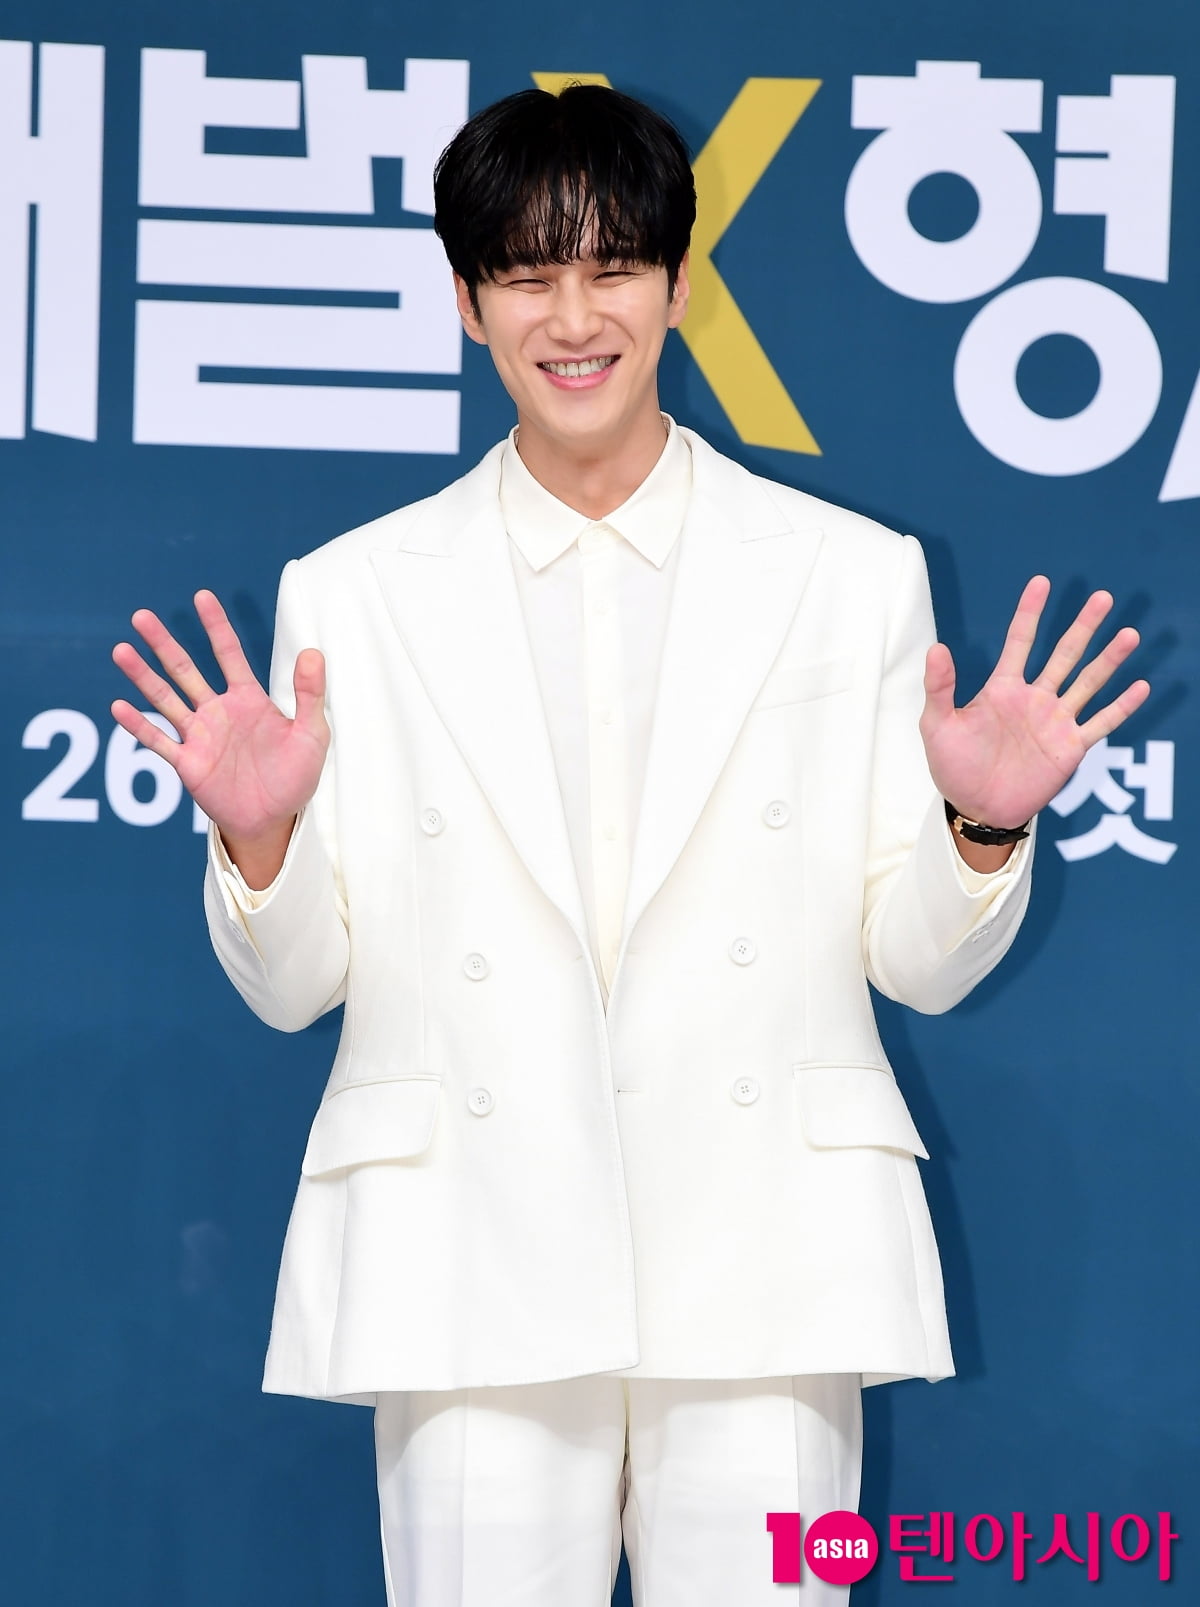 Ahn Bo-hyun, the perfect chaebol detective... falling in love with his smile 